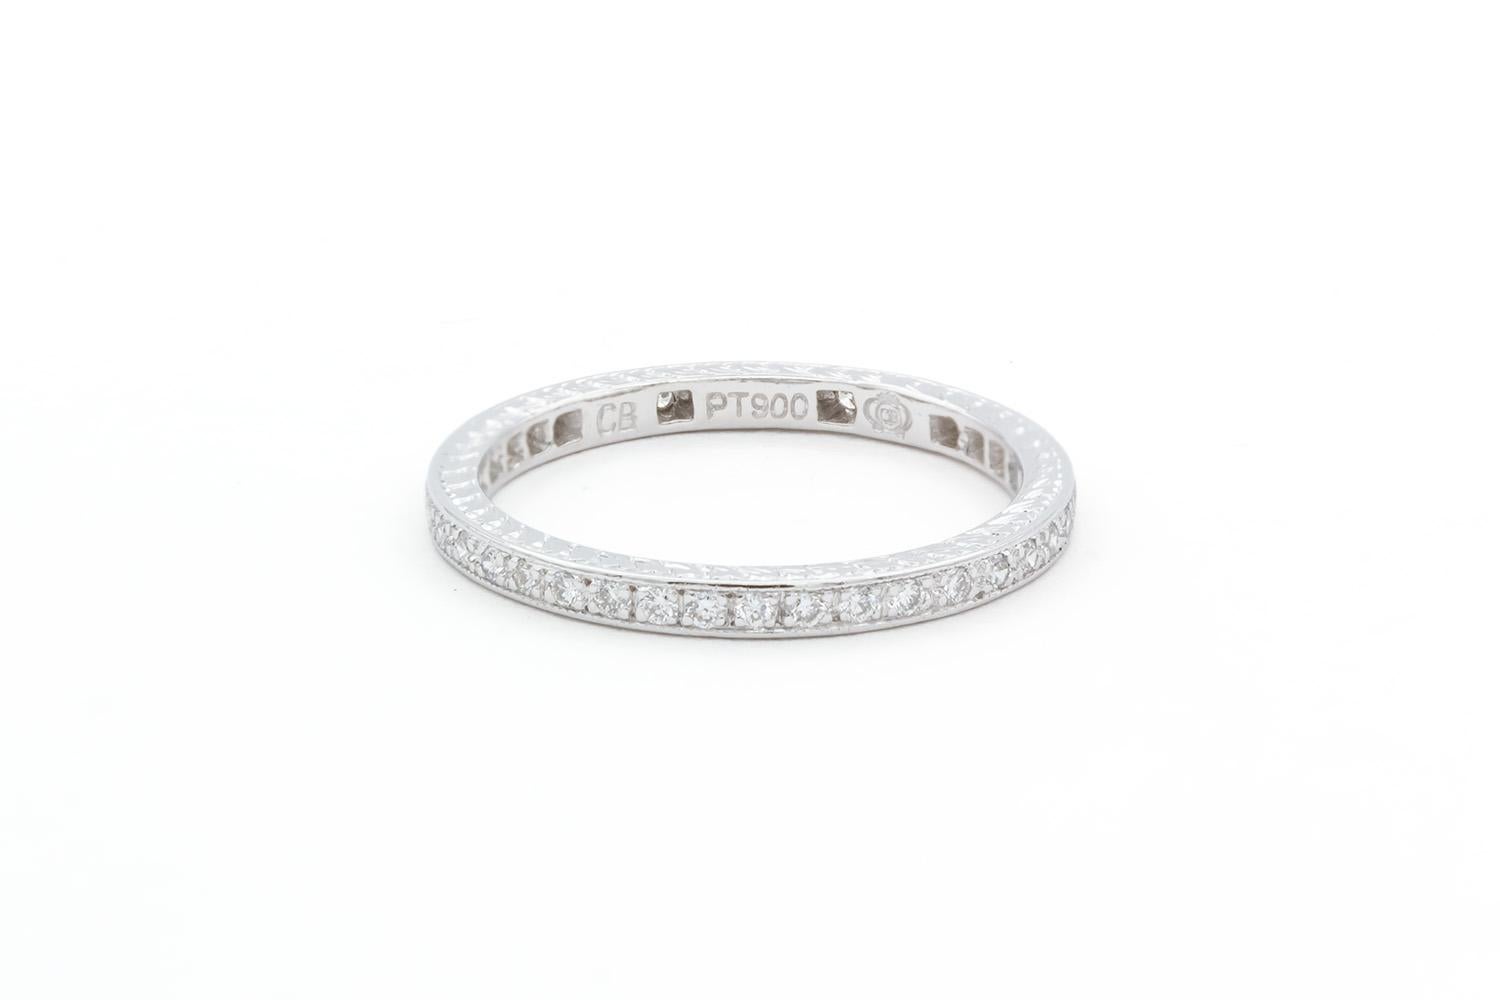 We are pleased to offer this Platinum Round Brilliant Cut Diamond Eternity Wedding Band. This beautiful wedding band features an eternity style band with an estimated 0.52ctw F-G/VS-SI round brilliant cut diamonds all set in a stunning platinum